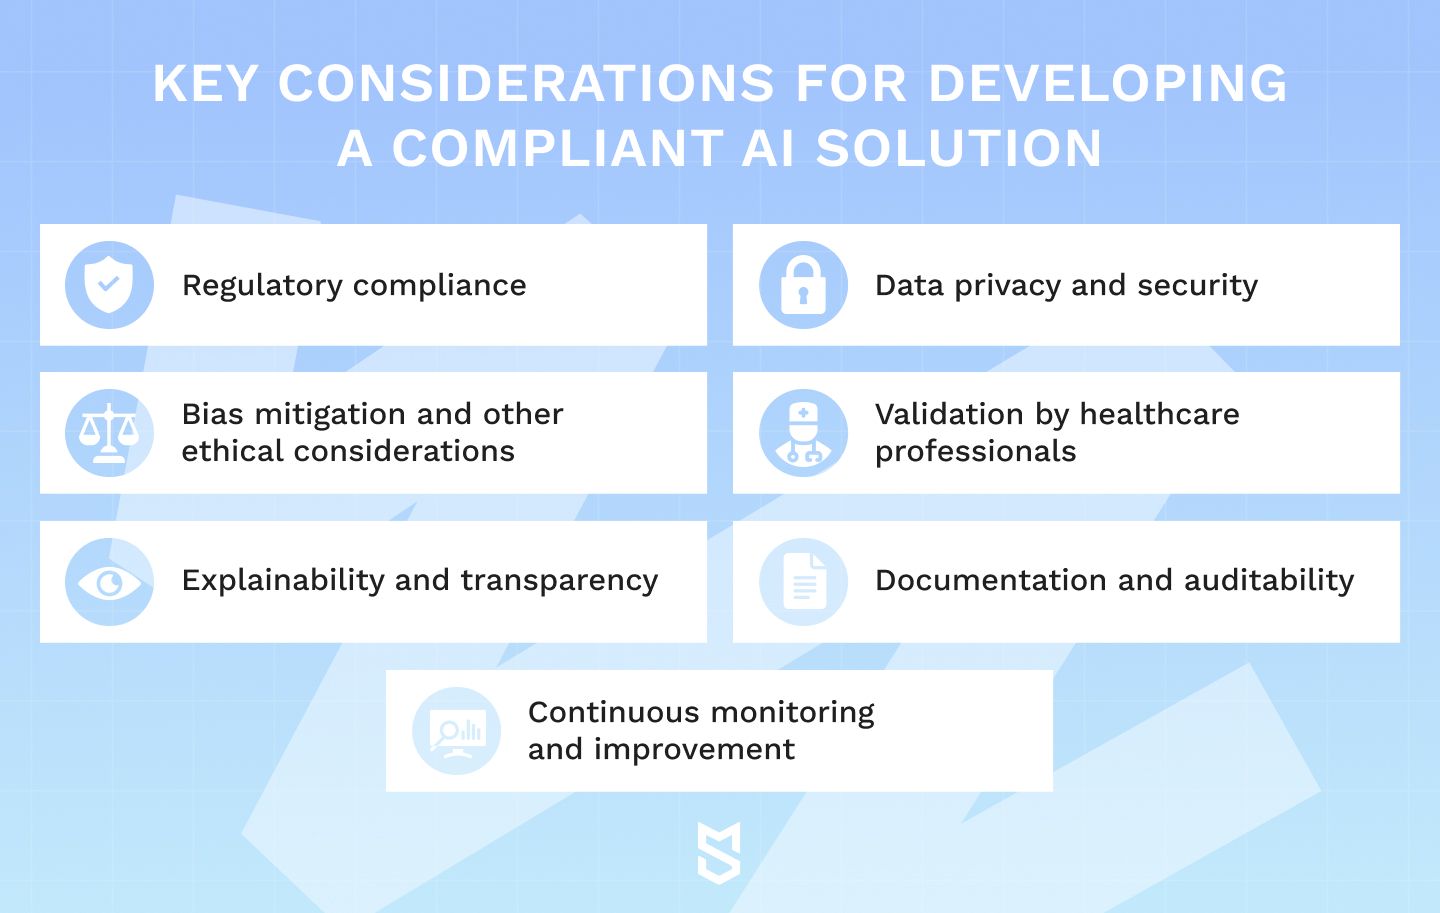 Key considerations for developing a compliant AI solution